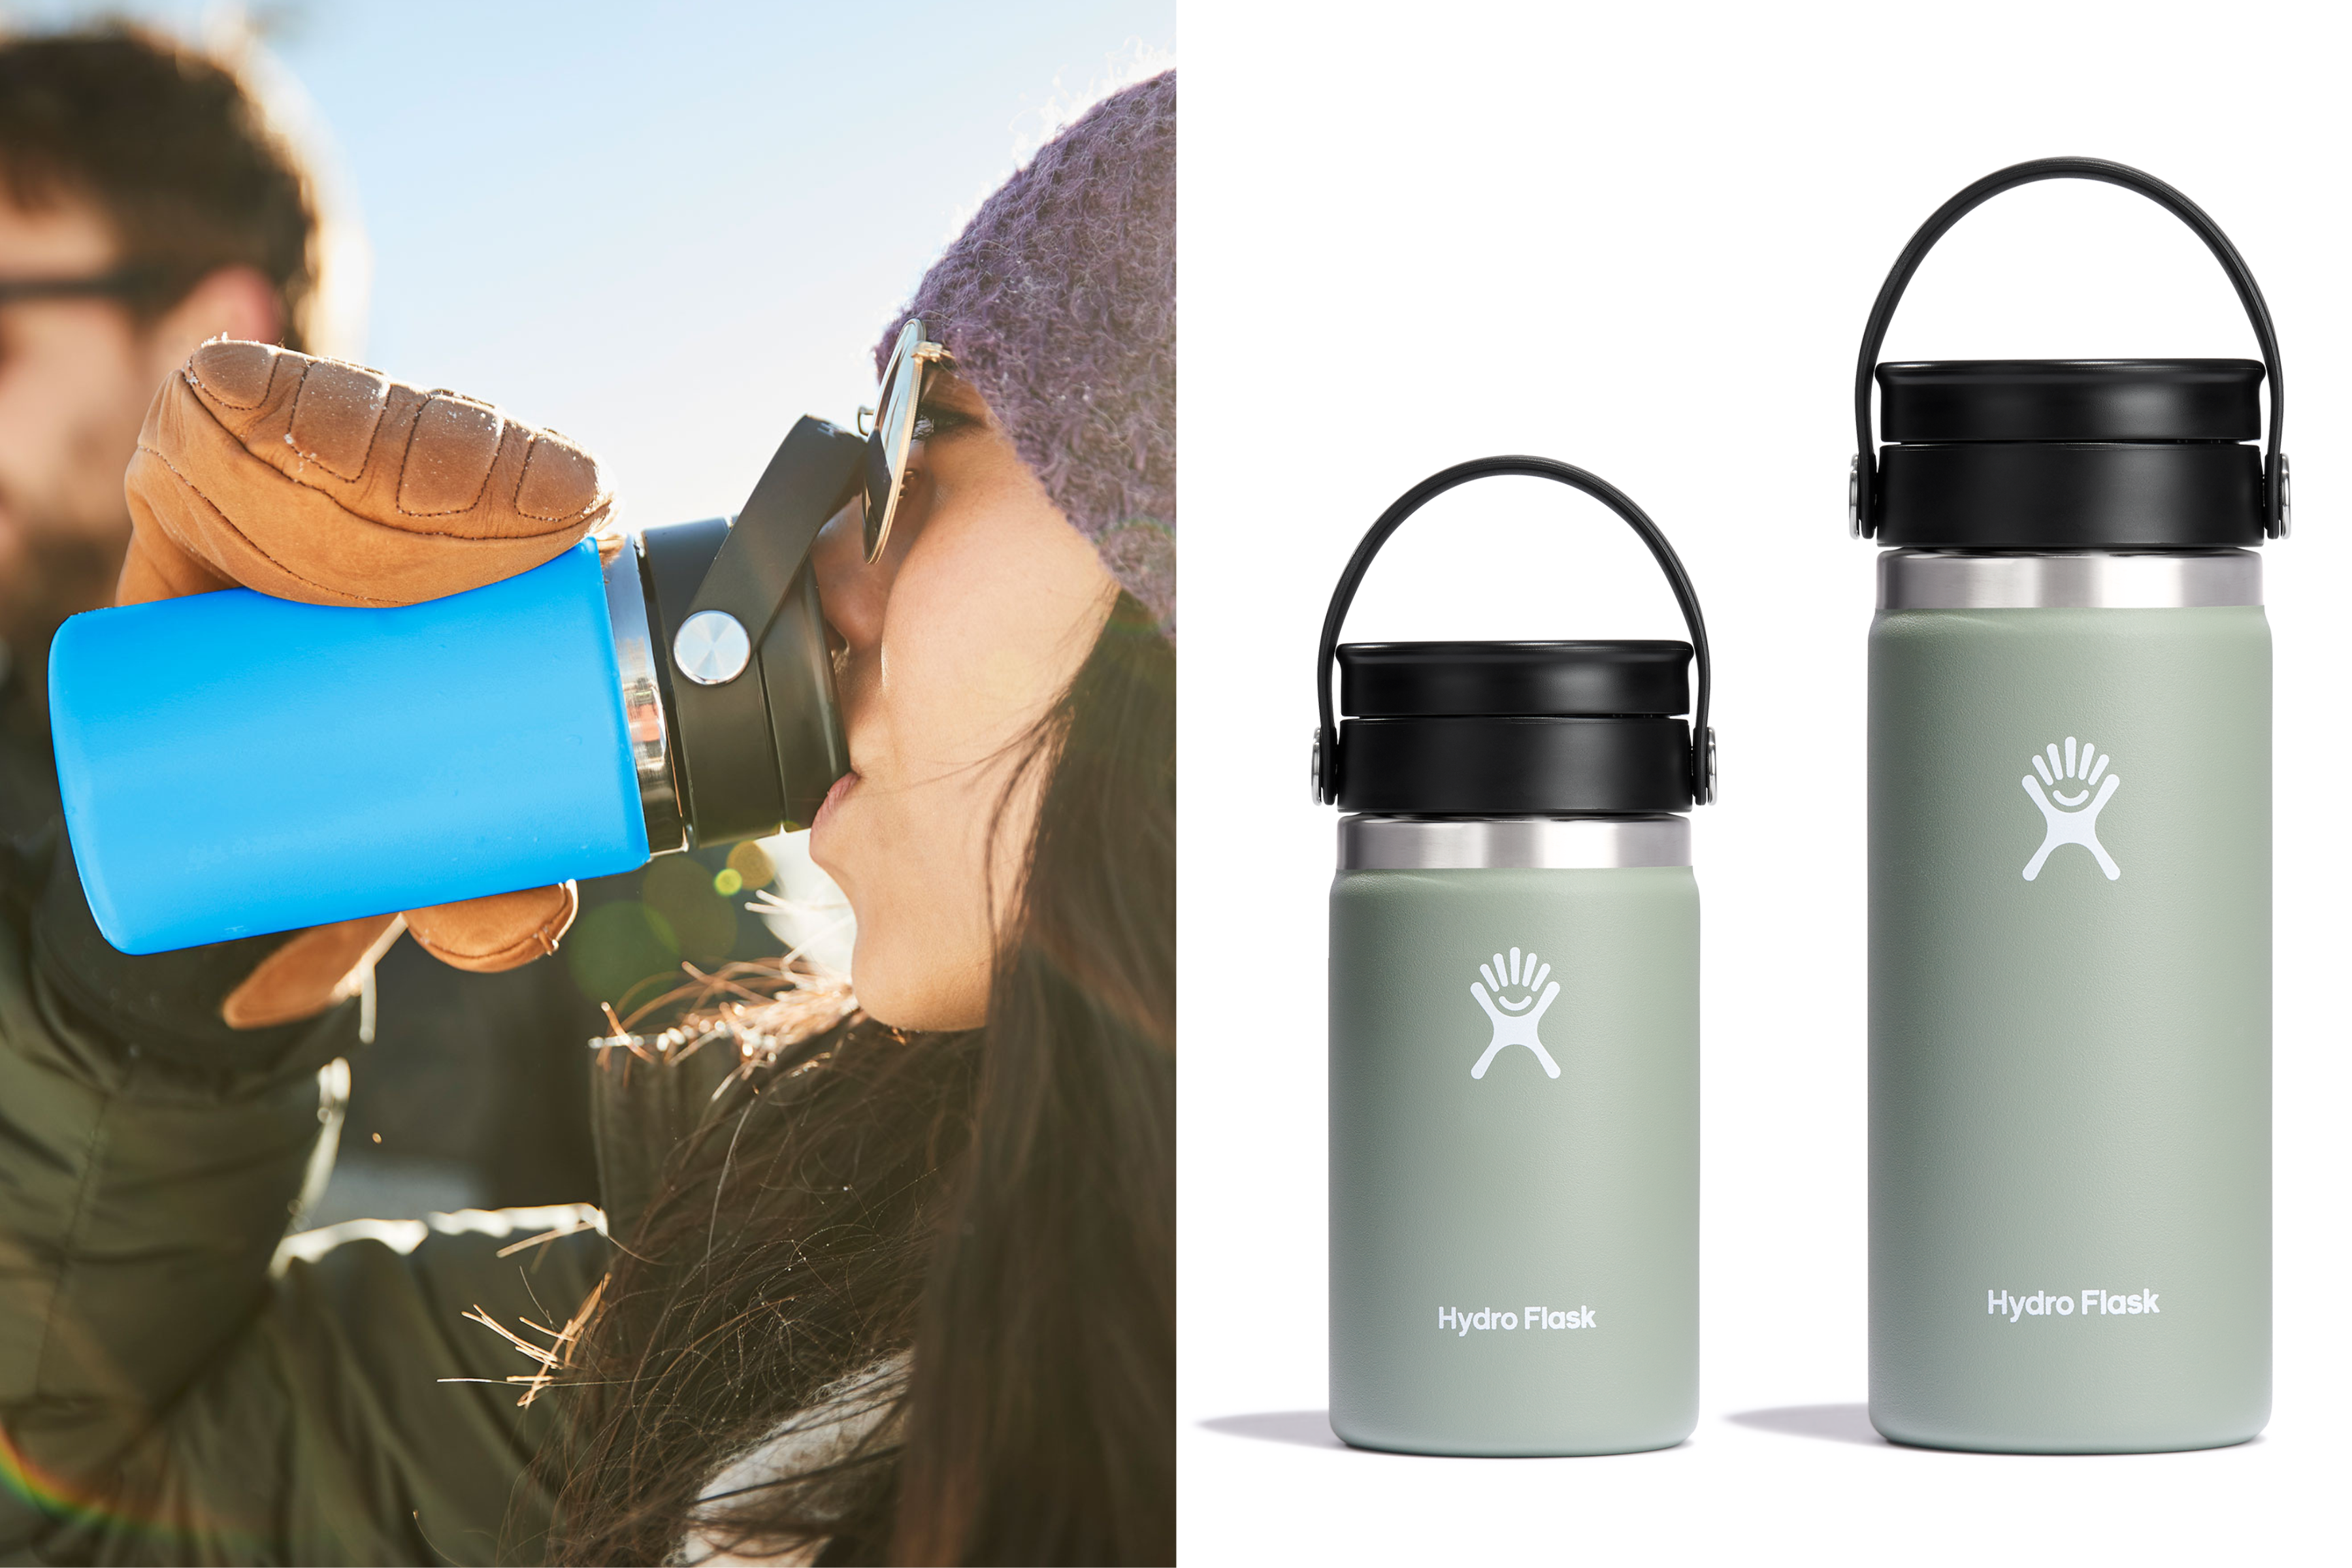 Hydro Flask has come out with ‘THE’ coffee cup you need